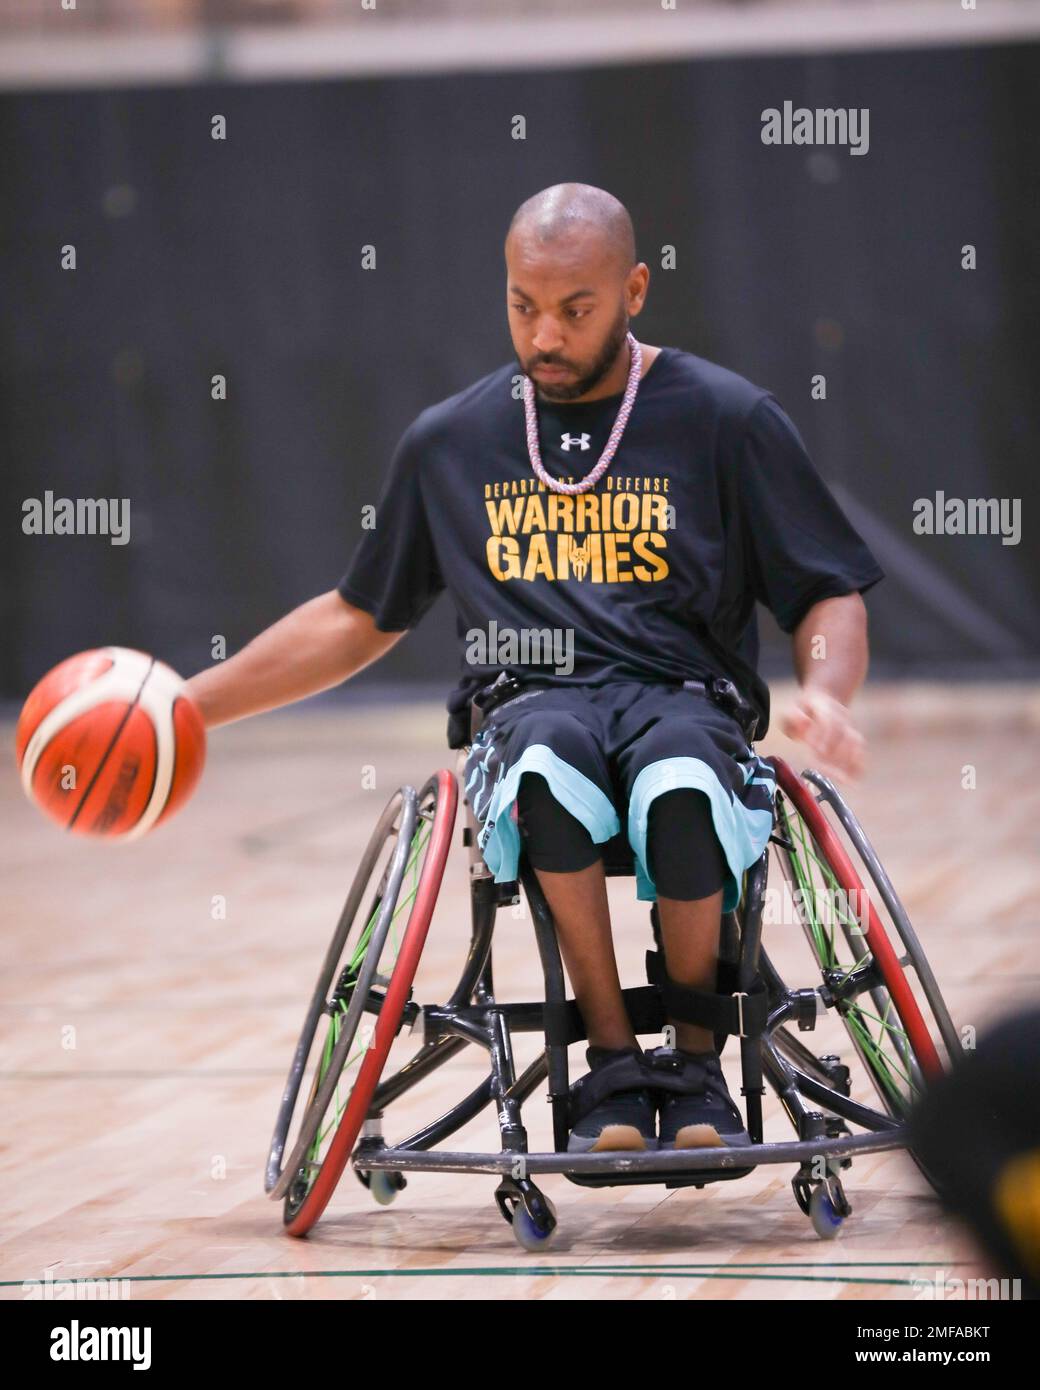 Retired U.S. Army Spc. Brent Garlic dribbles the ball at wheelchair  basketball practice during the 2022 Department of Defense Warrior Games at  the ESPN Wide World of Sports Complex in Orlando, Florida